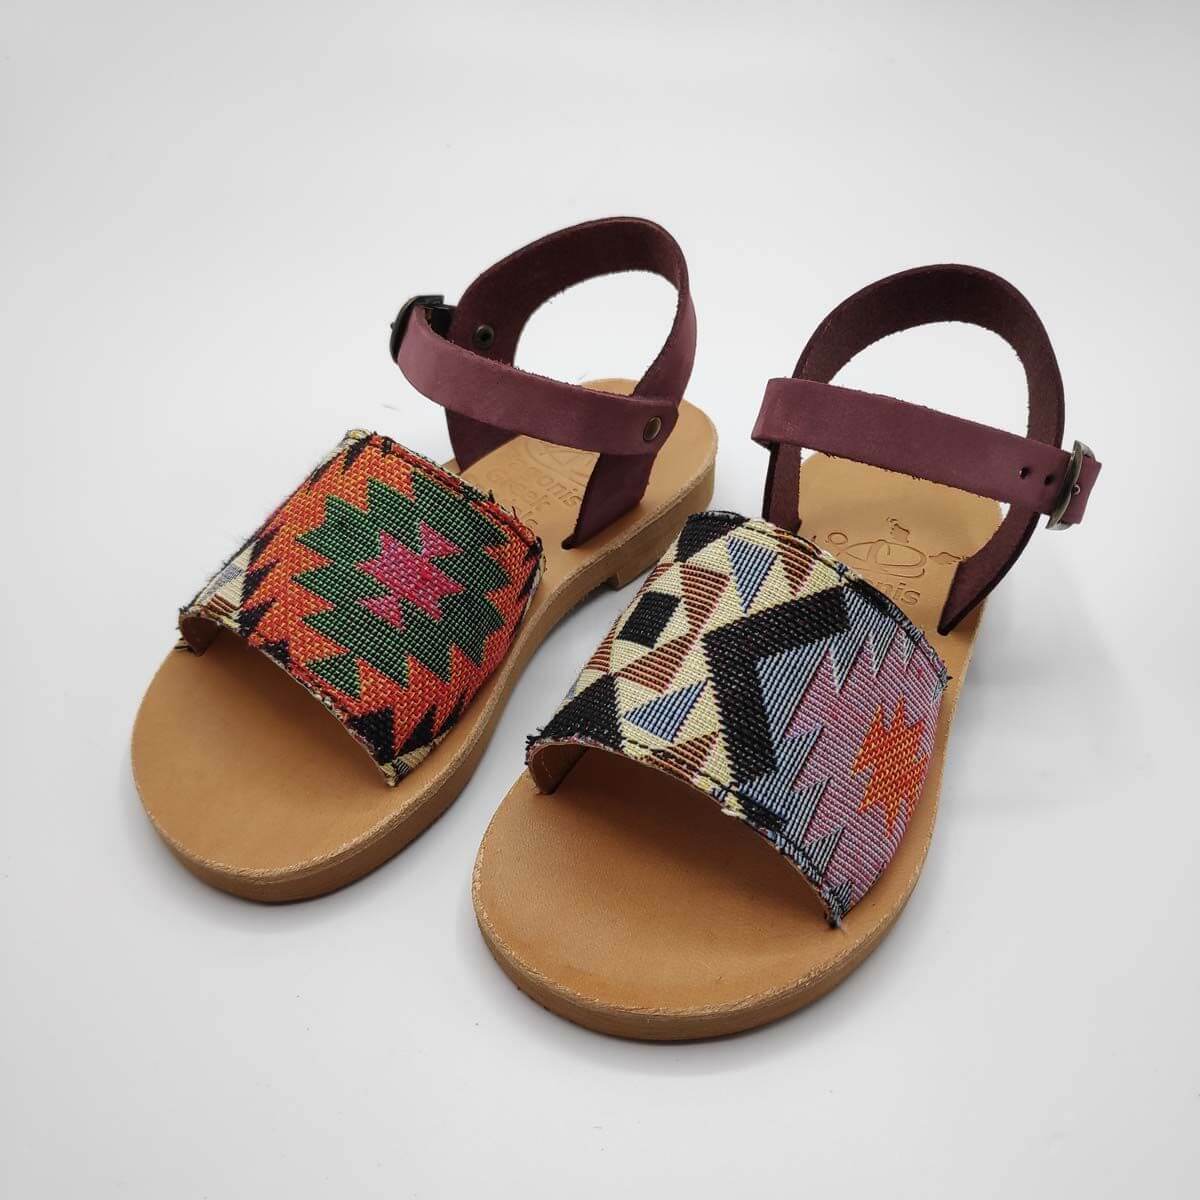 Leather Toddler Sandals For Girls |  Purple and checkered fabric